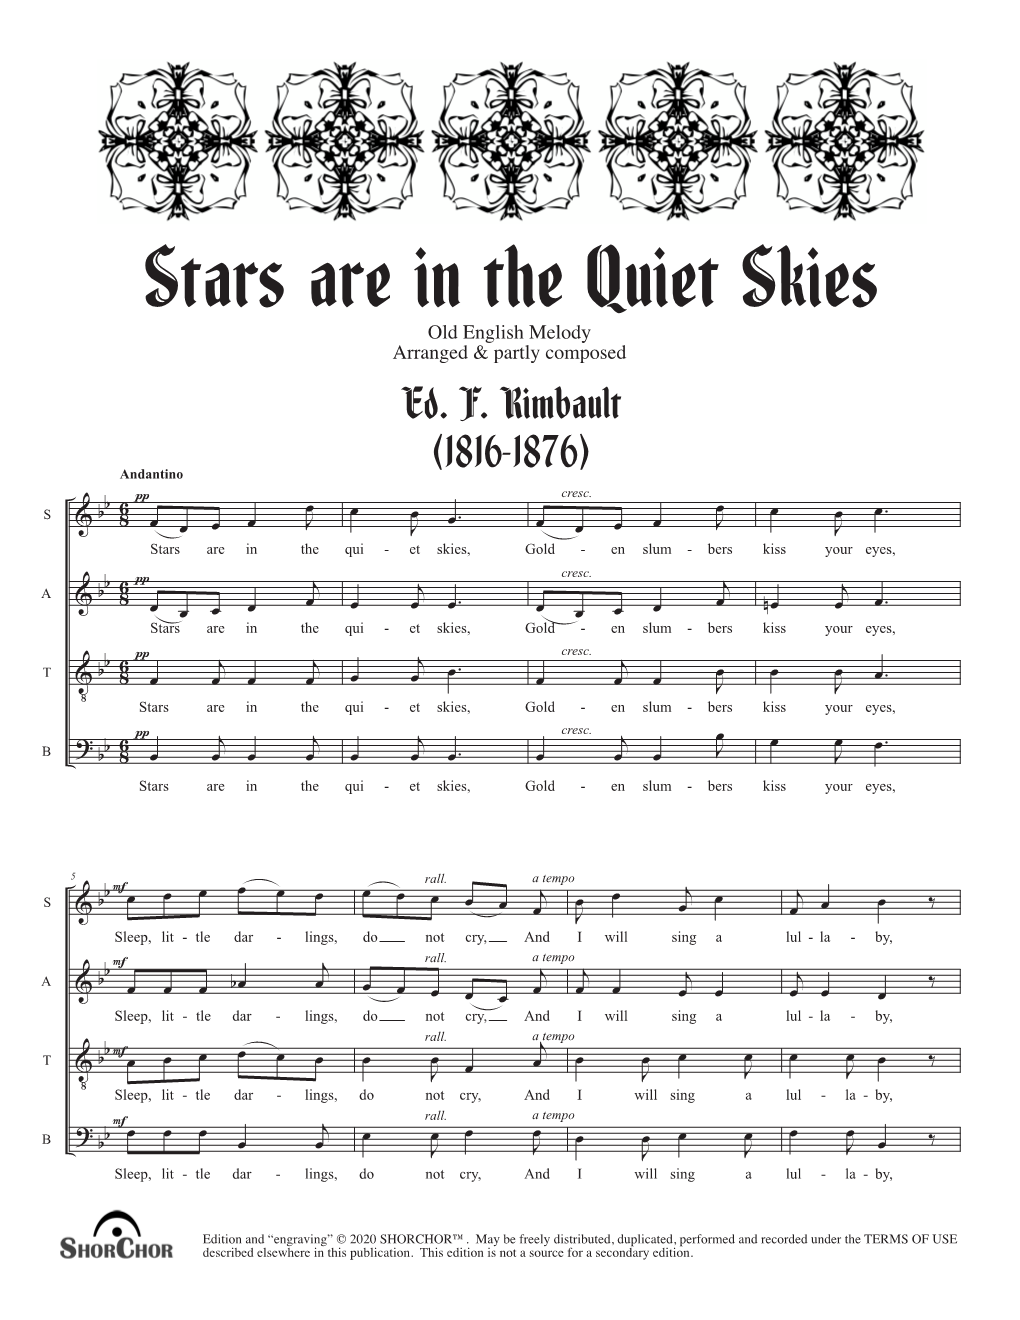 Stars Are in the Quiet Skies Old English Melody Arranged & Partly Composed Ed